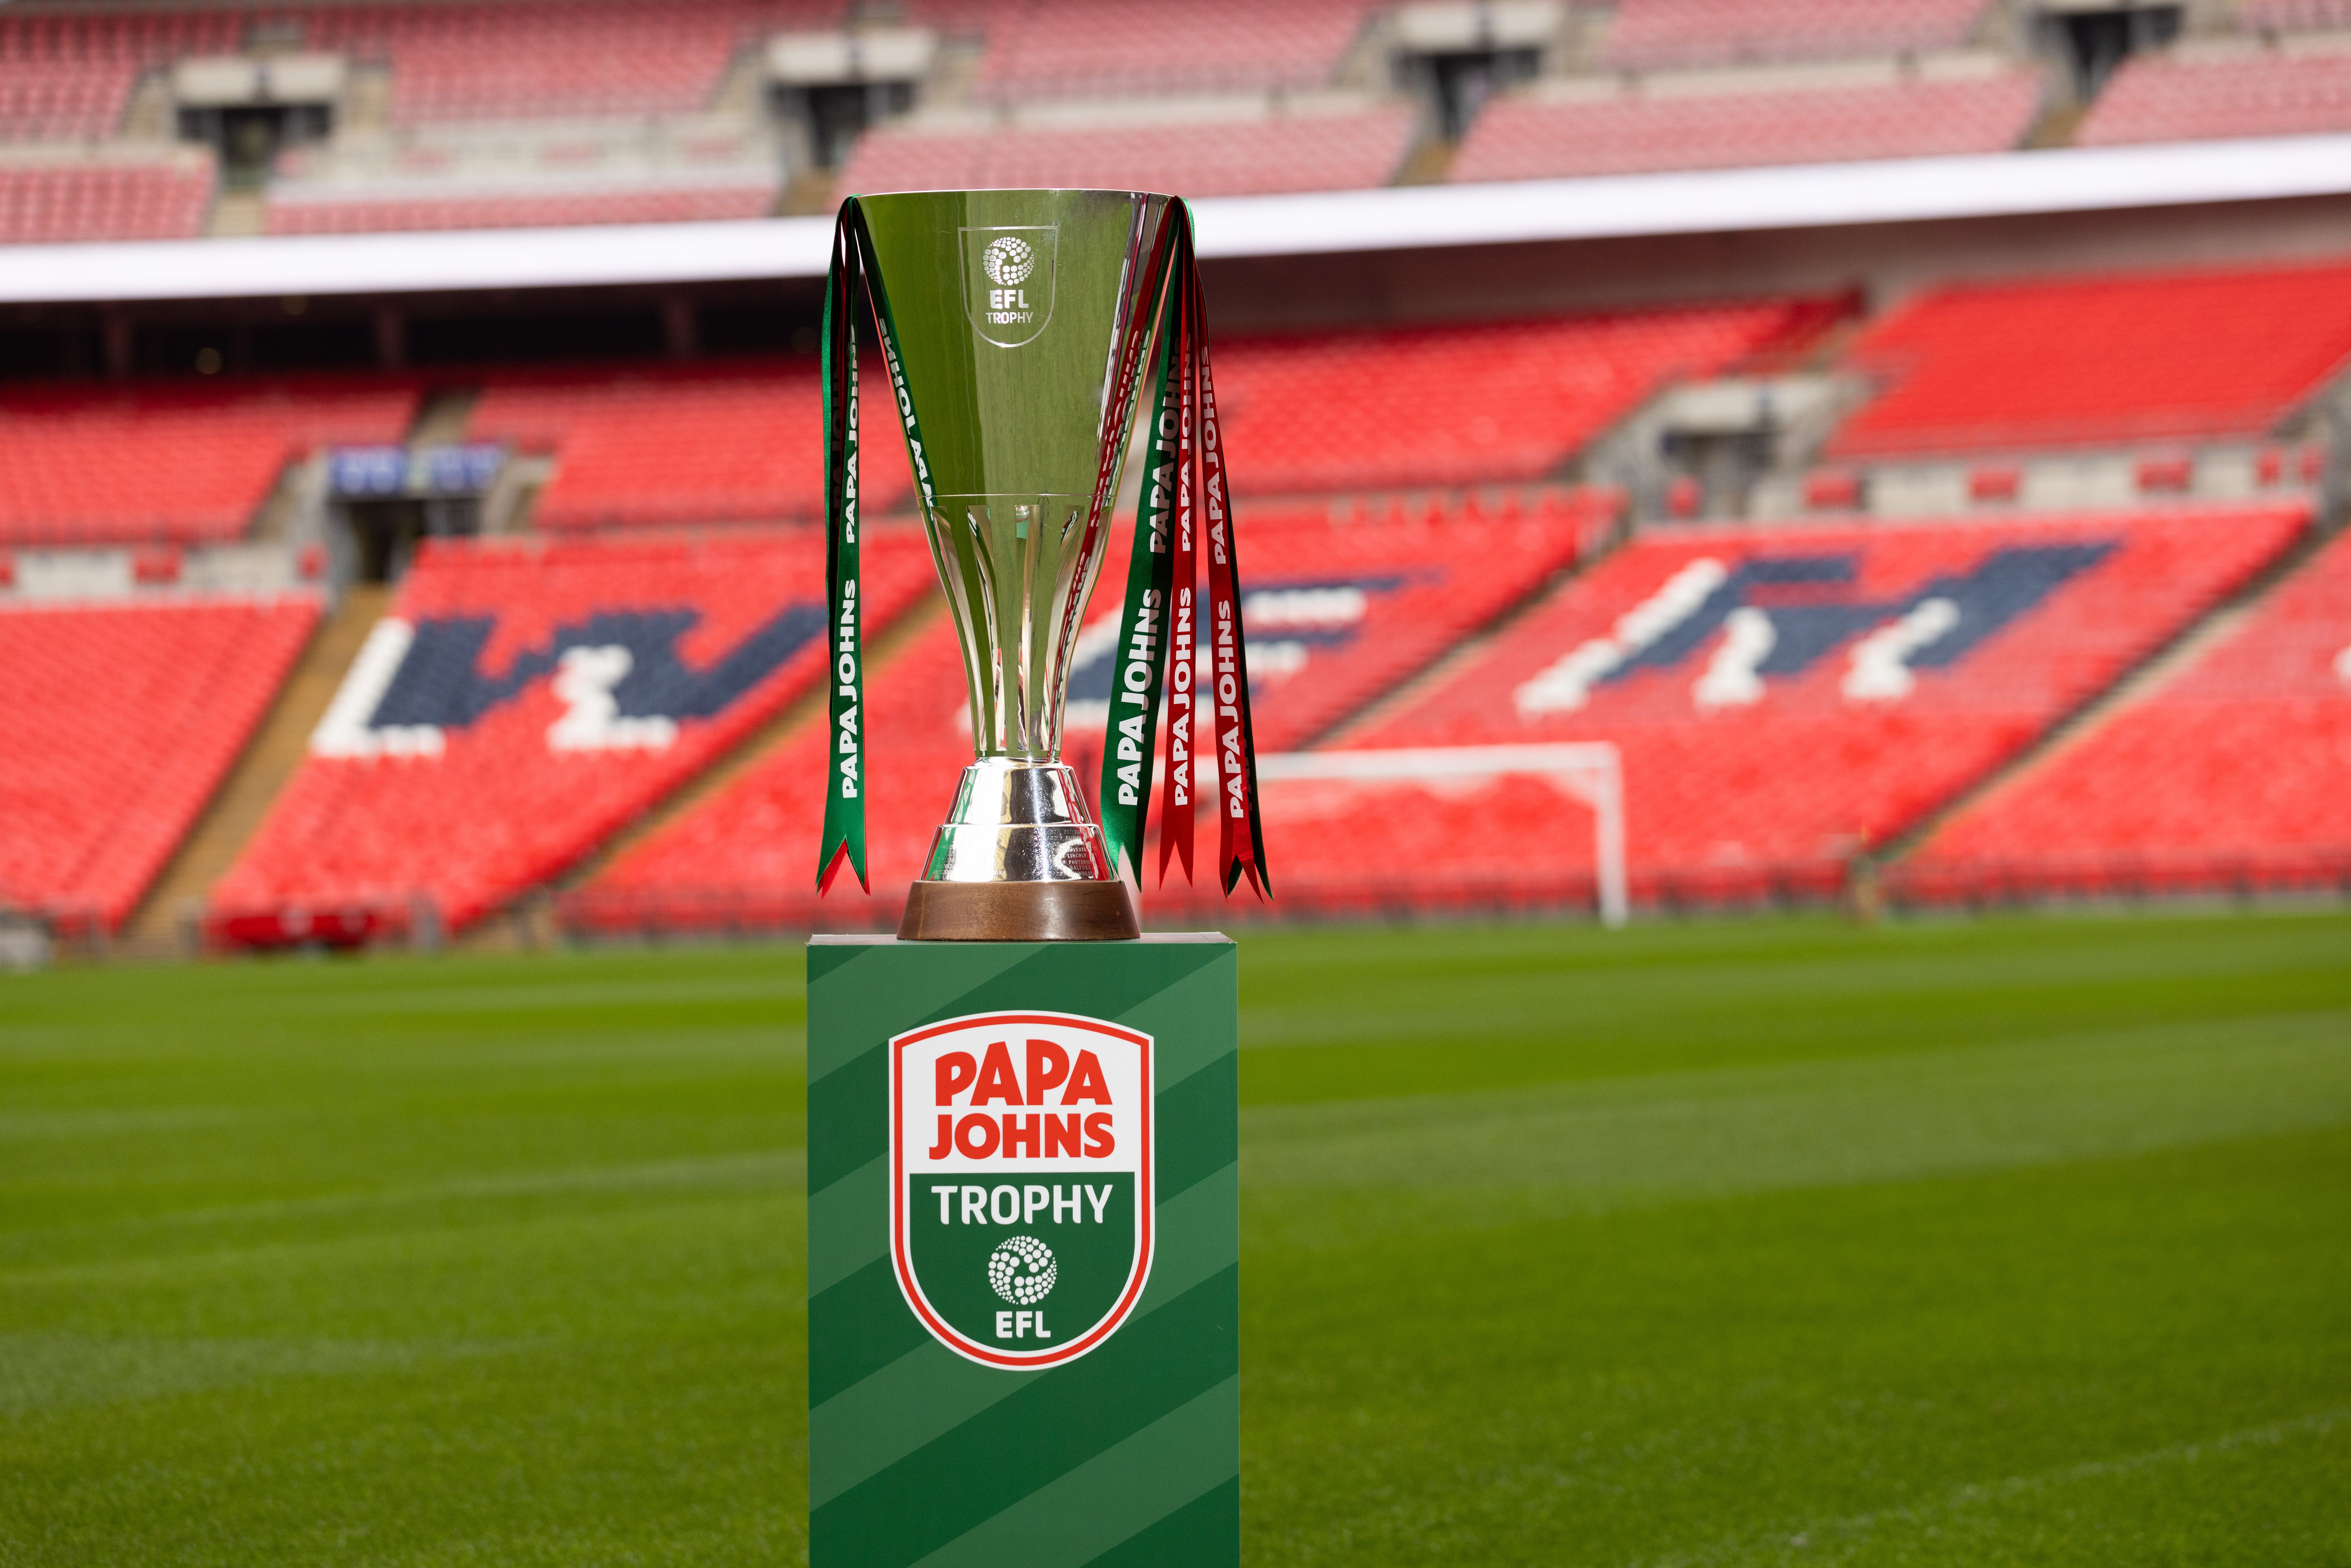 The Papa Johns Trophy on the pitch at Wembley Stadium